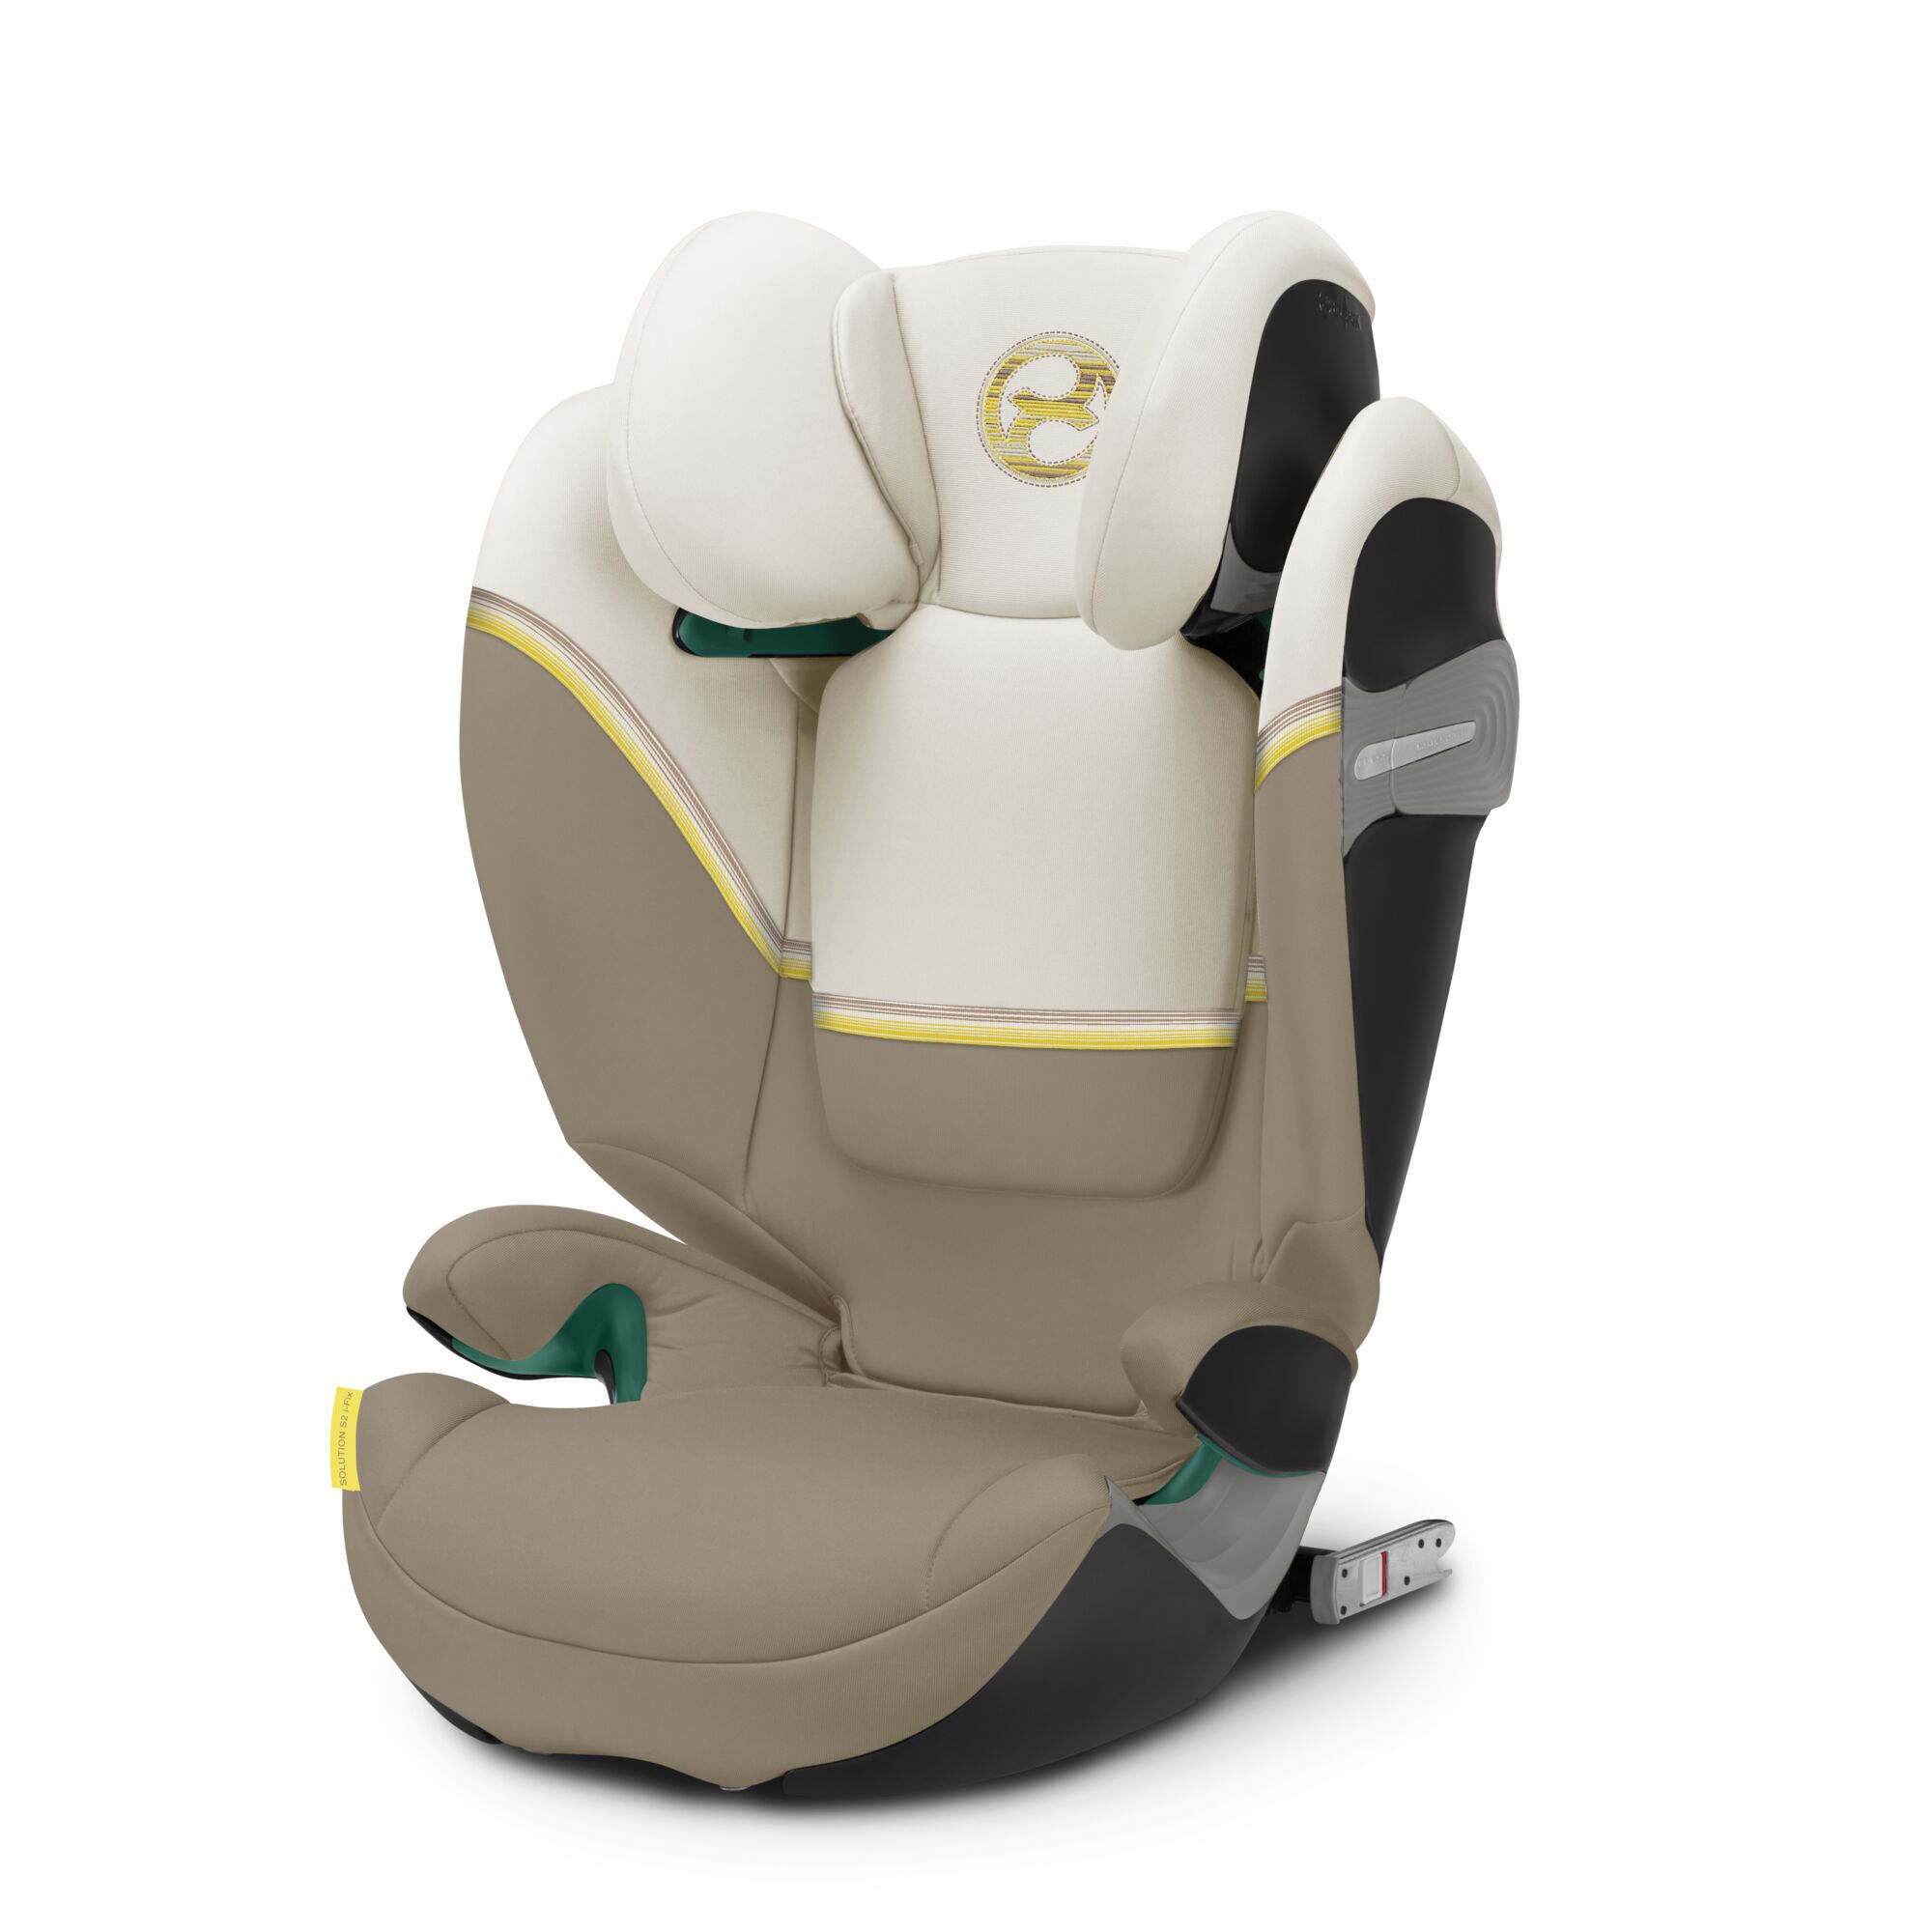 Cybex Pallas G i-Size Car Seat, Lava Grey: Buy Online at Best Price in UAE  